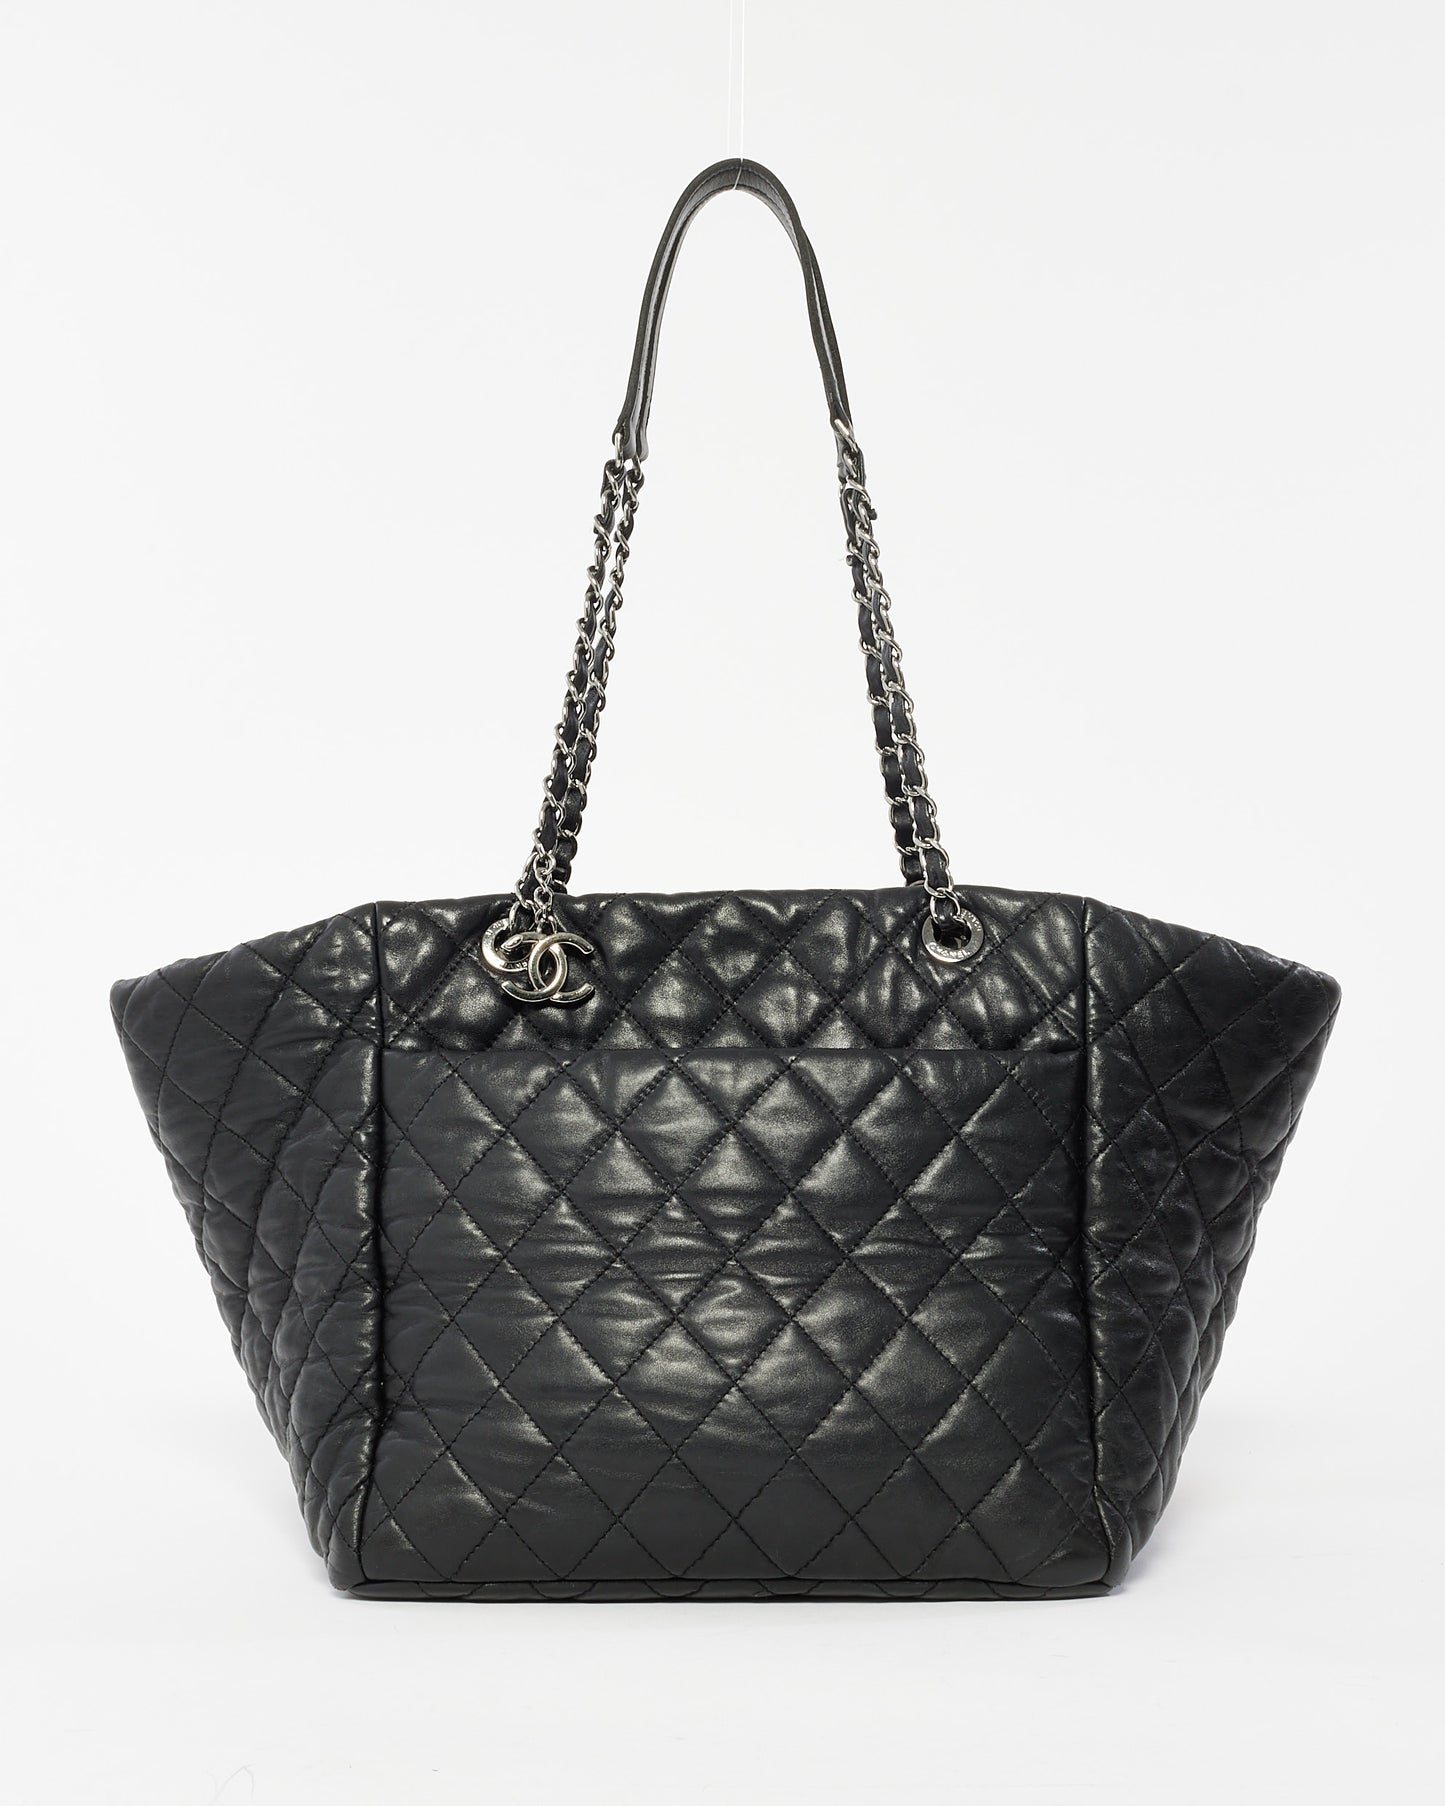 Chanel Black Calfskin Leather Ultimate Stitch Shopping Tote